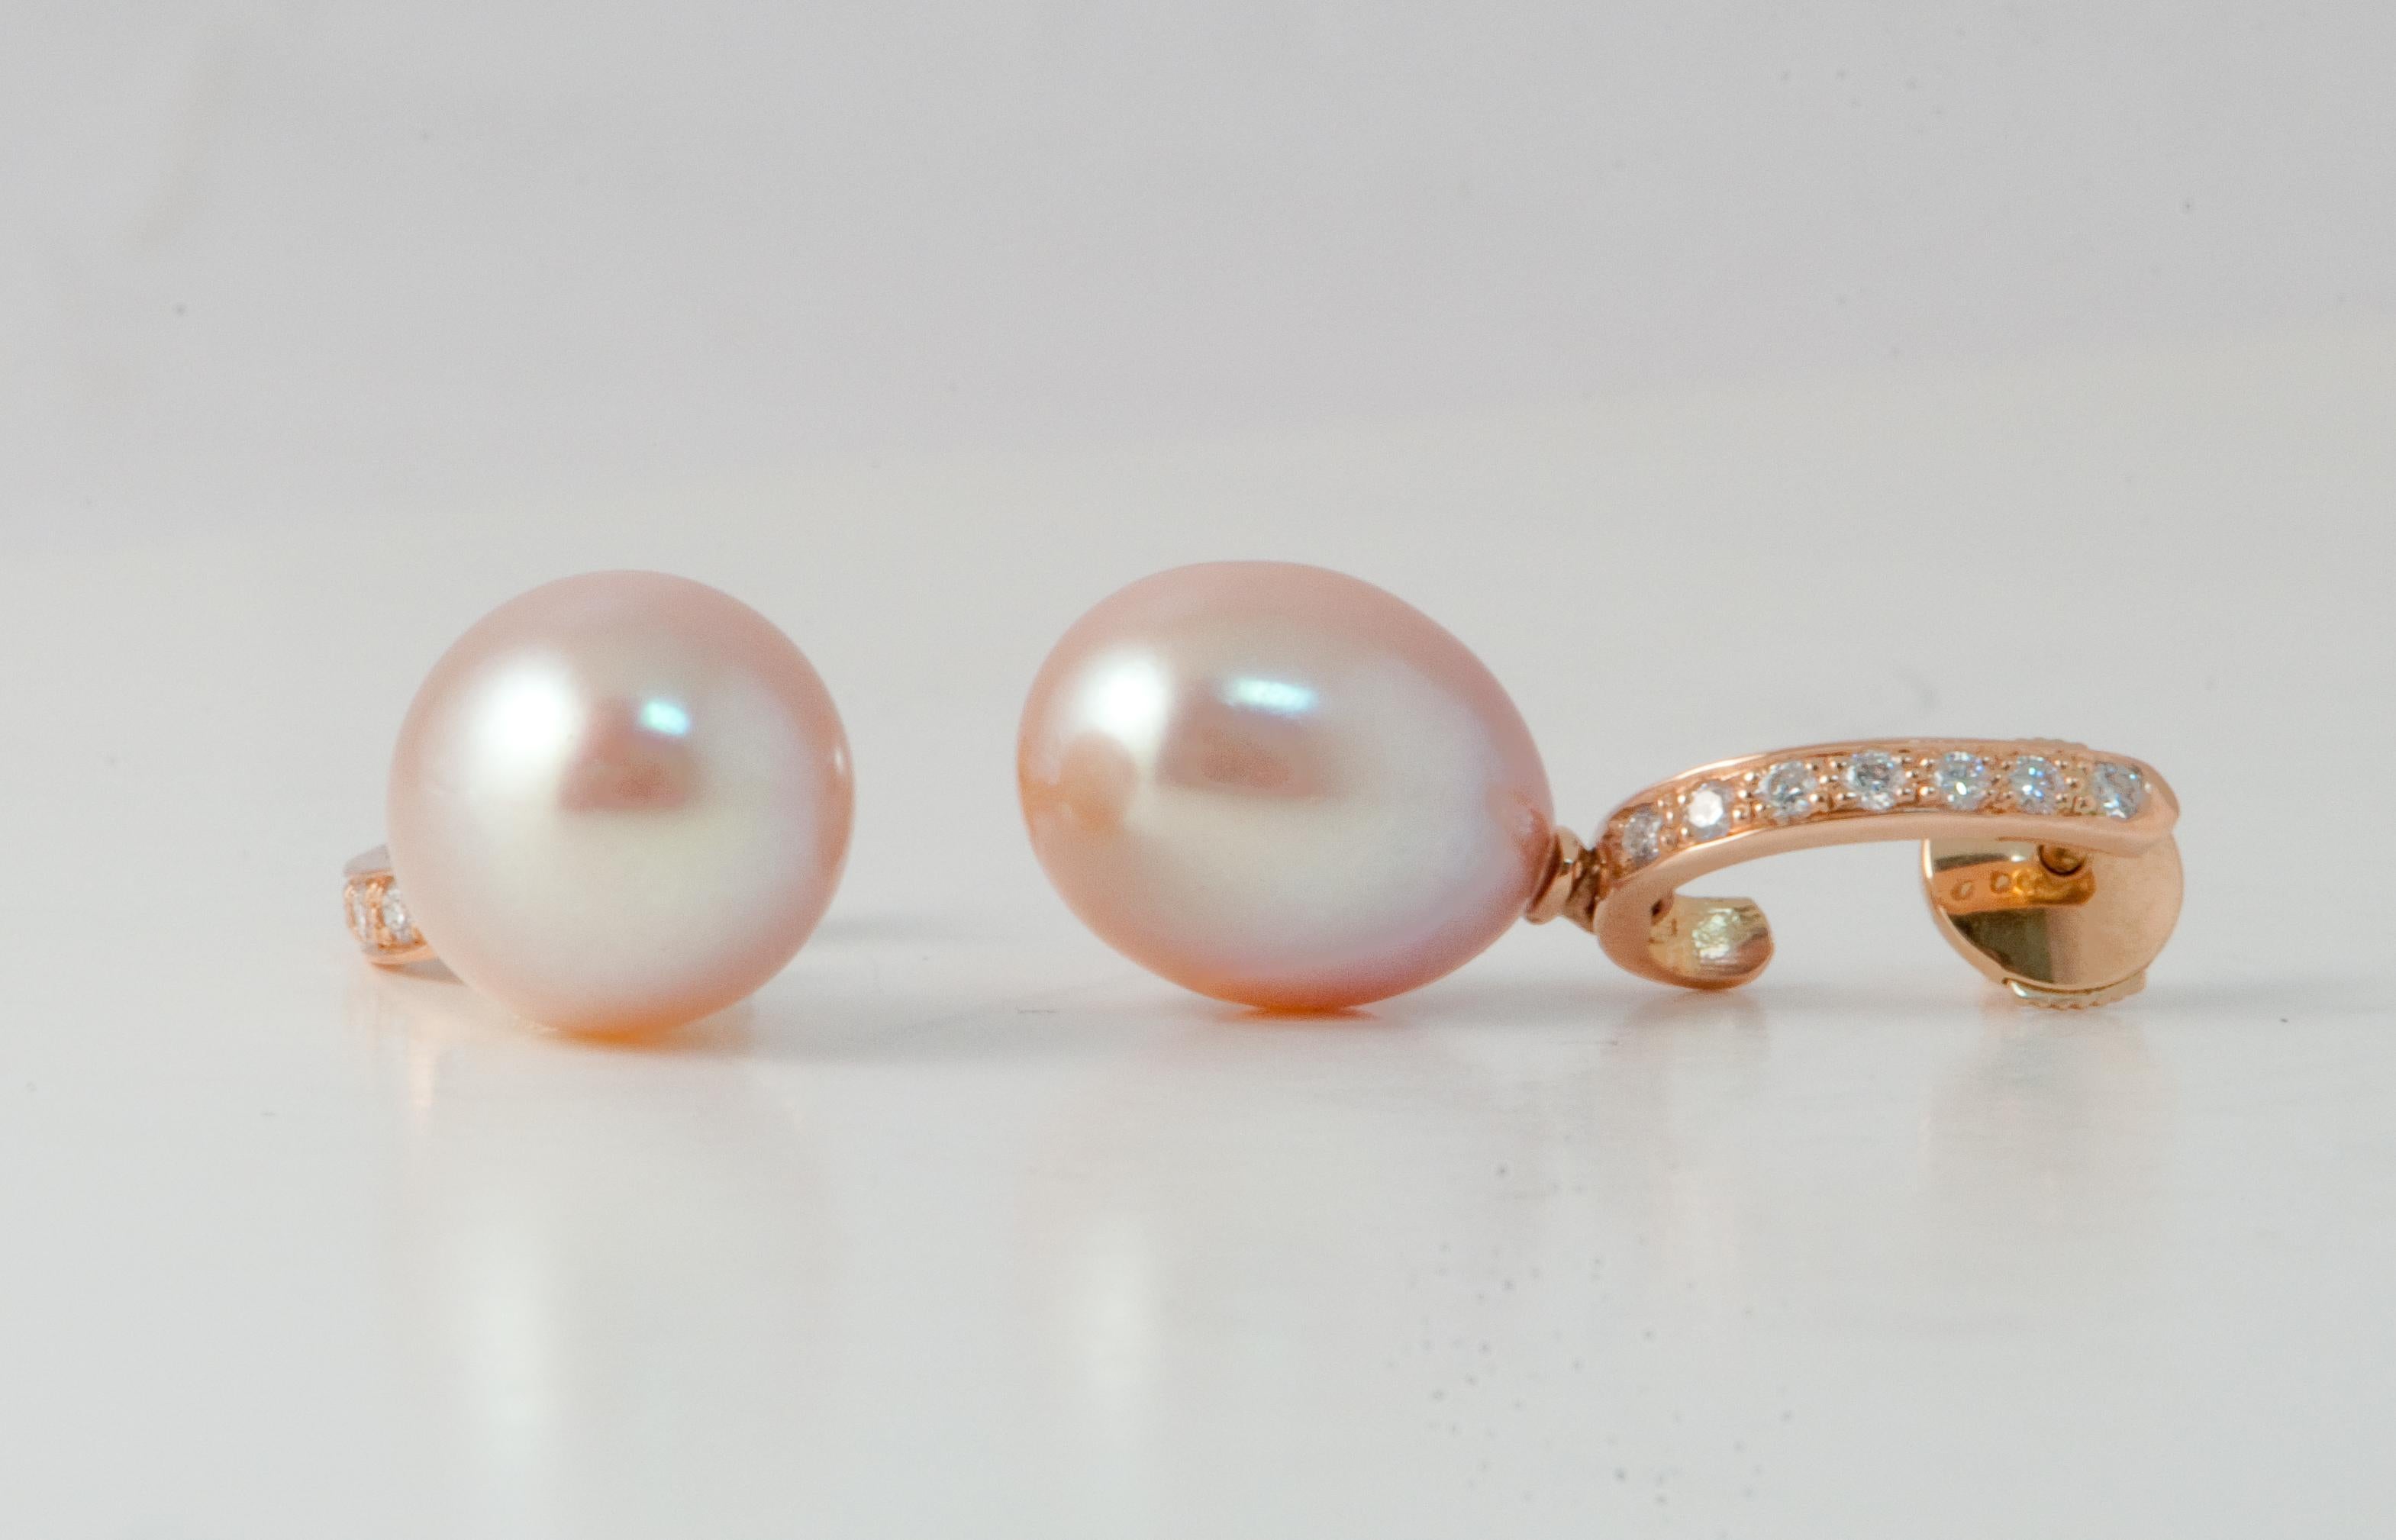 Discover this Pink Freshwater Pearls and White Diamonds on pink Gold 18 ct Drop Earrings.
14 White Diamonds Brilliant 0.180 Karat Color G/VS
Pink Gold 18 Karat 1.94 g